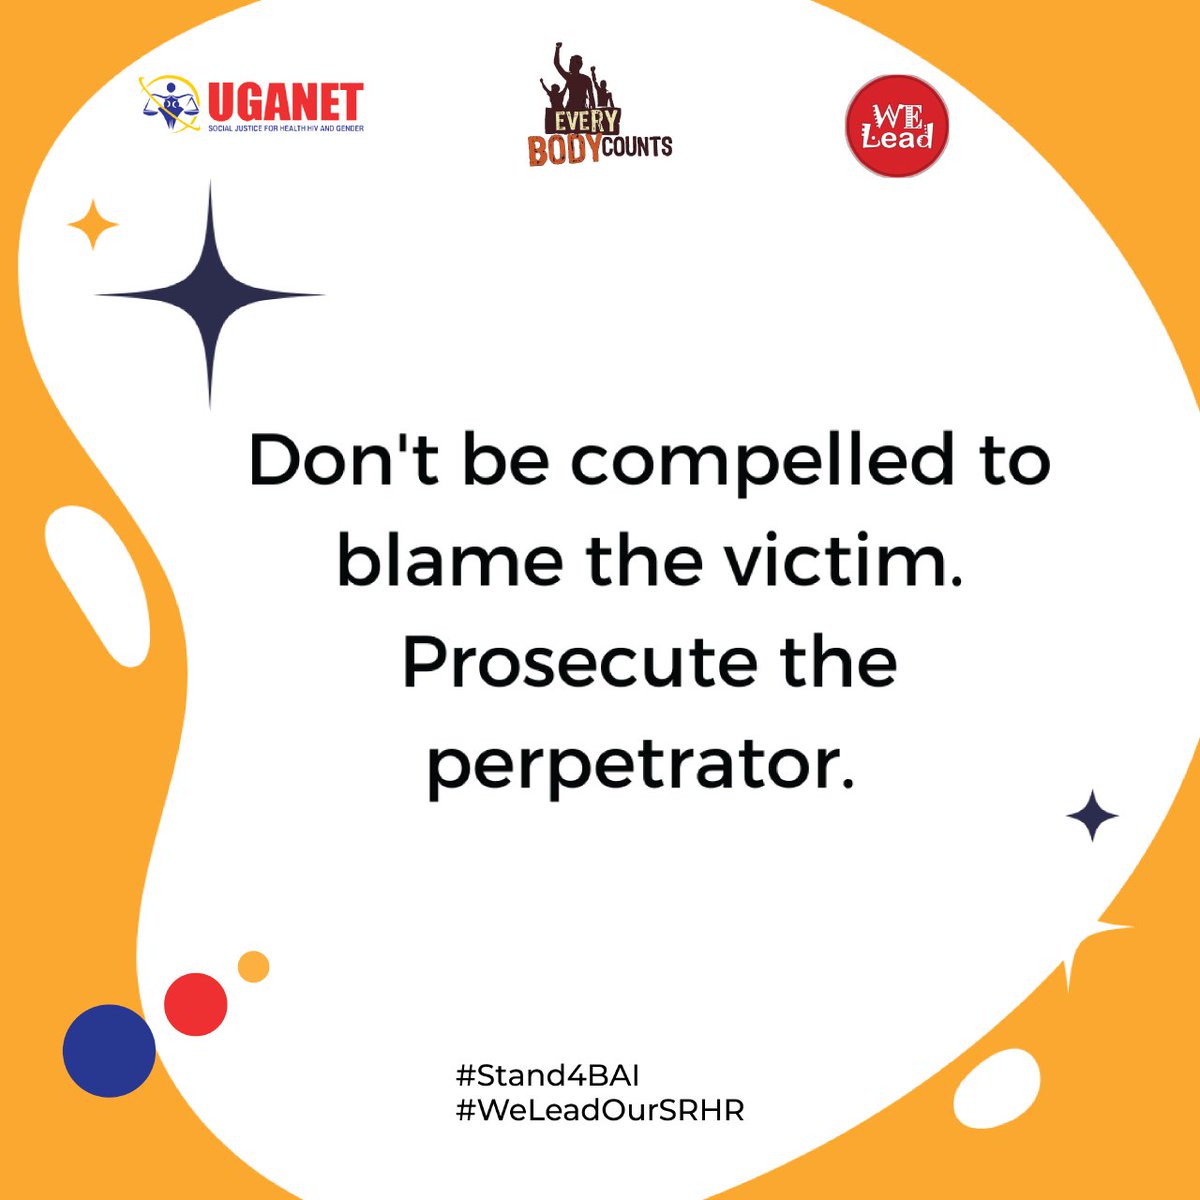 REMINDER: 

In all you do, don't be compelled to blame the victim. Always seek to prosecute the perpetrator. 

That's #justice. 
#WeLeadOurSRHR
#Stand4BAI #UGANET4SocialJustice